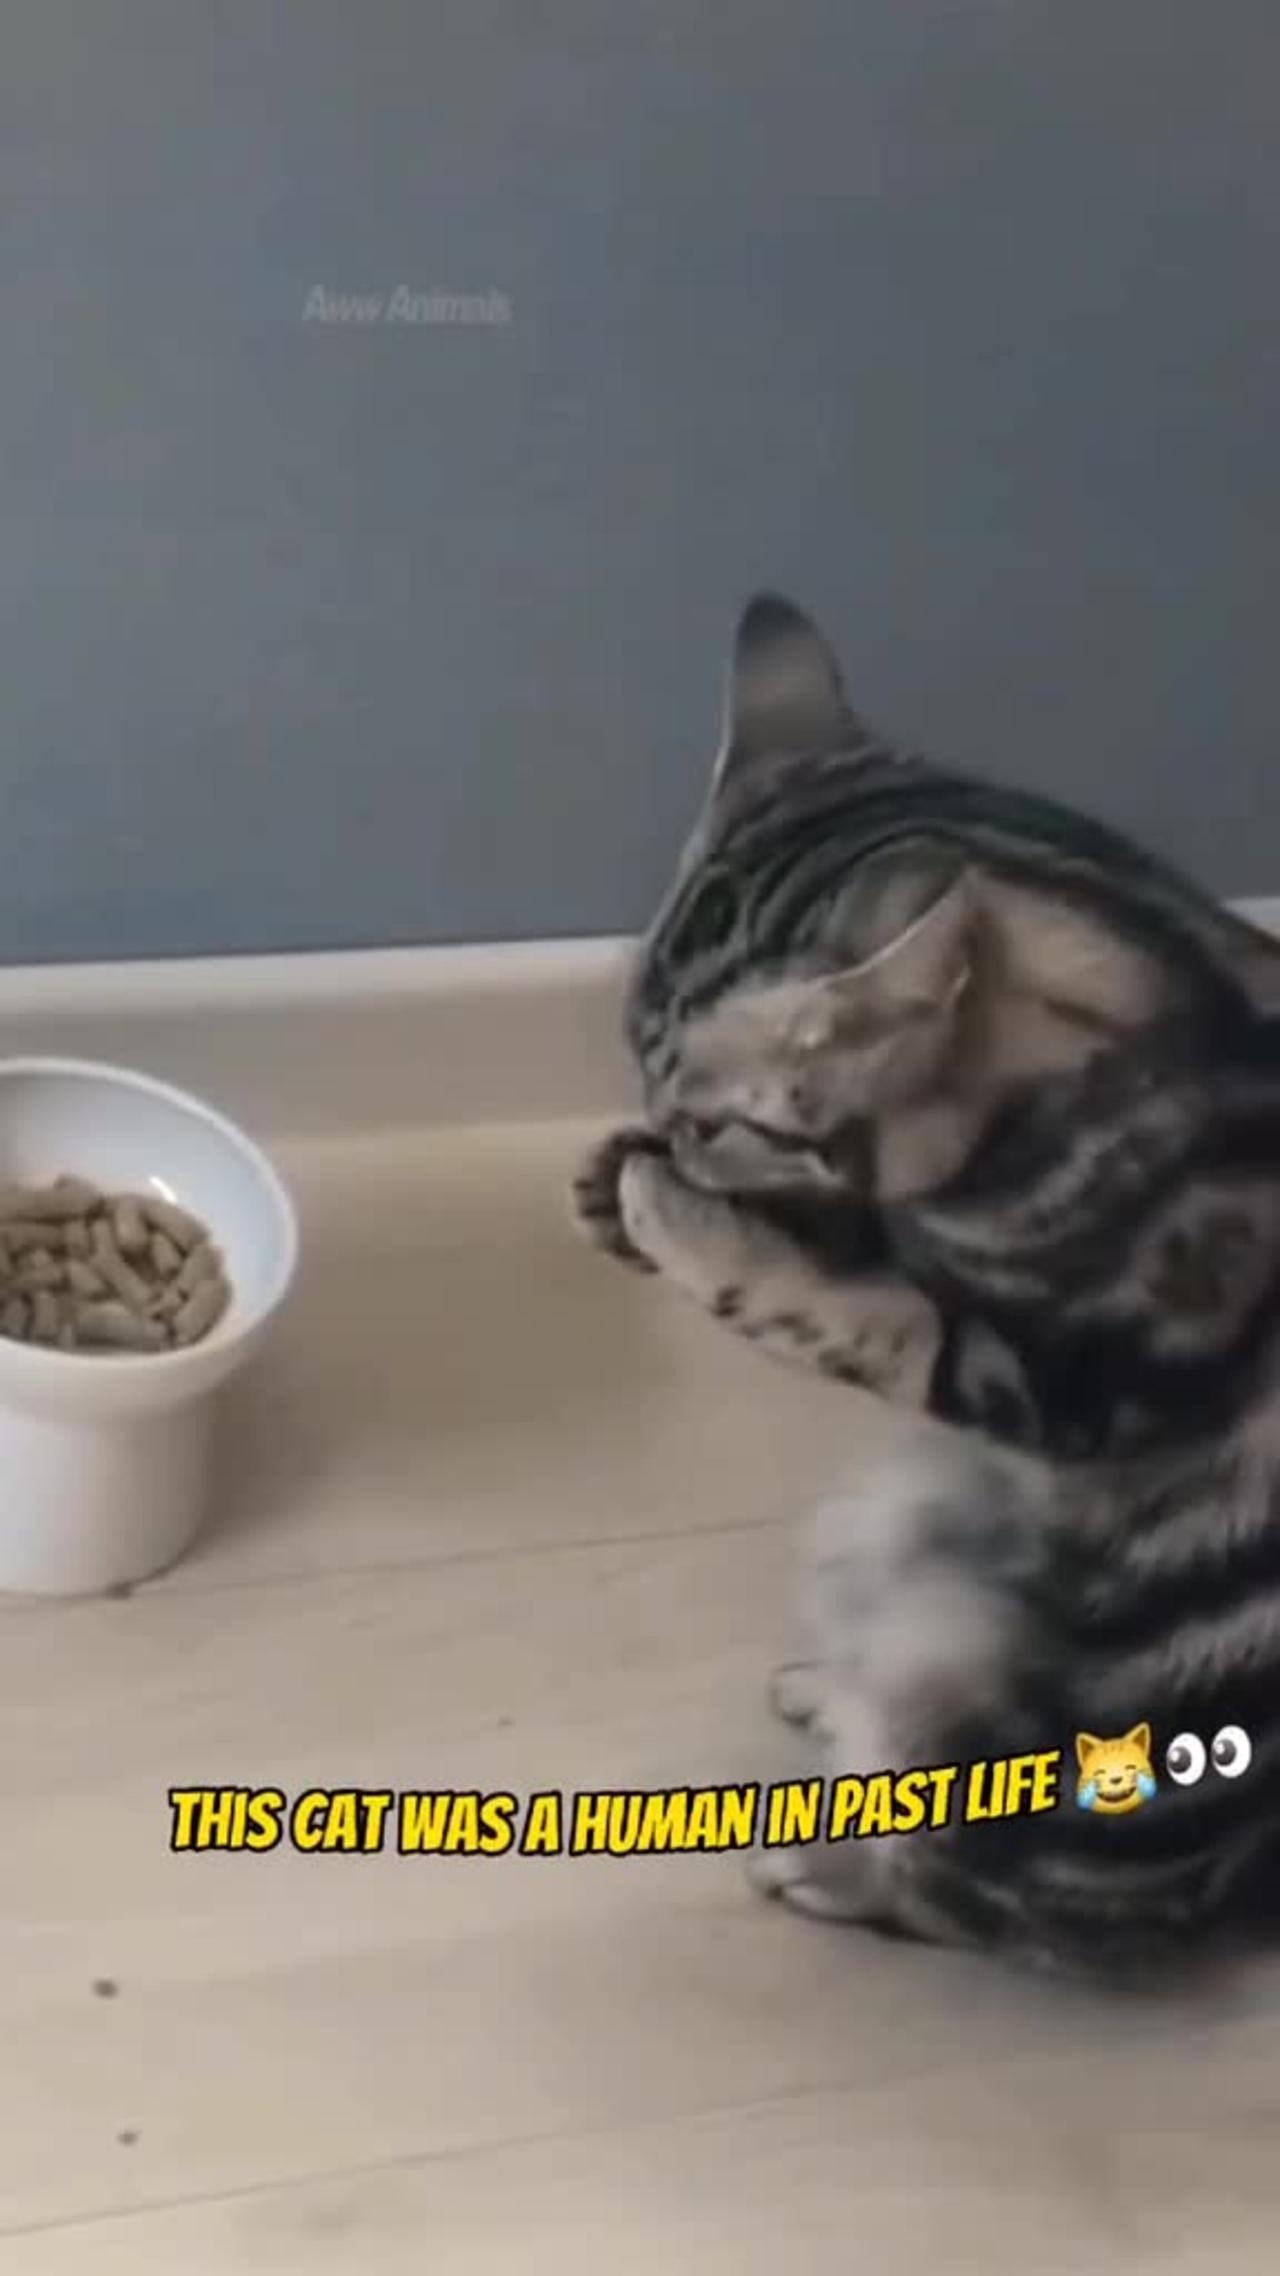 Have you seen a cat that eats like a human?